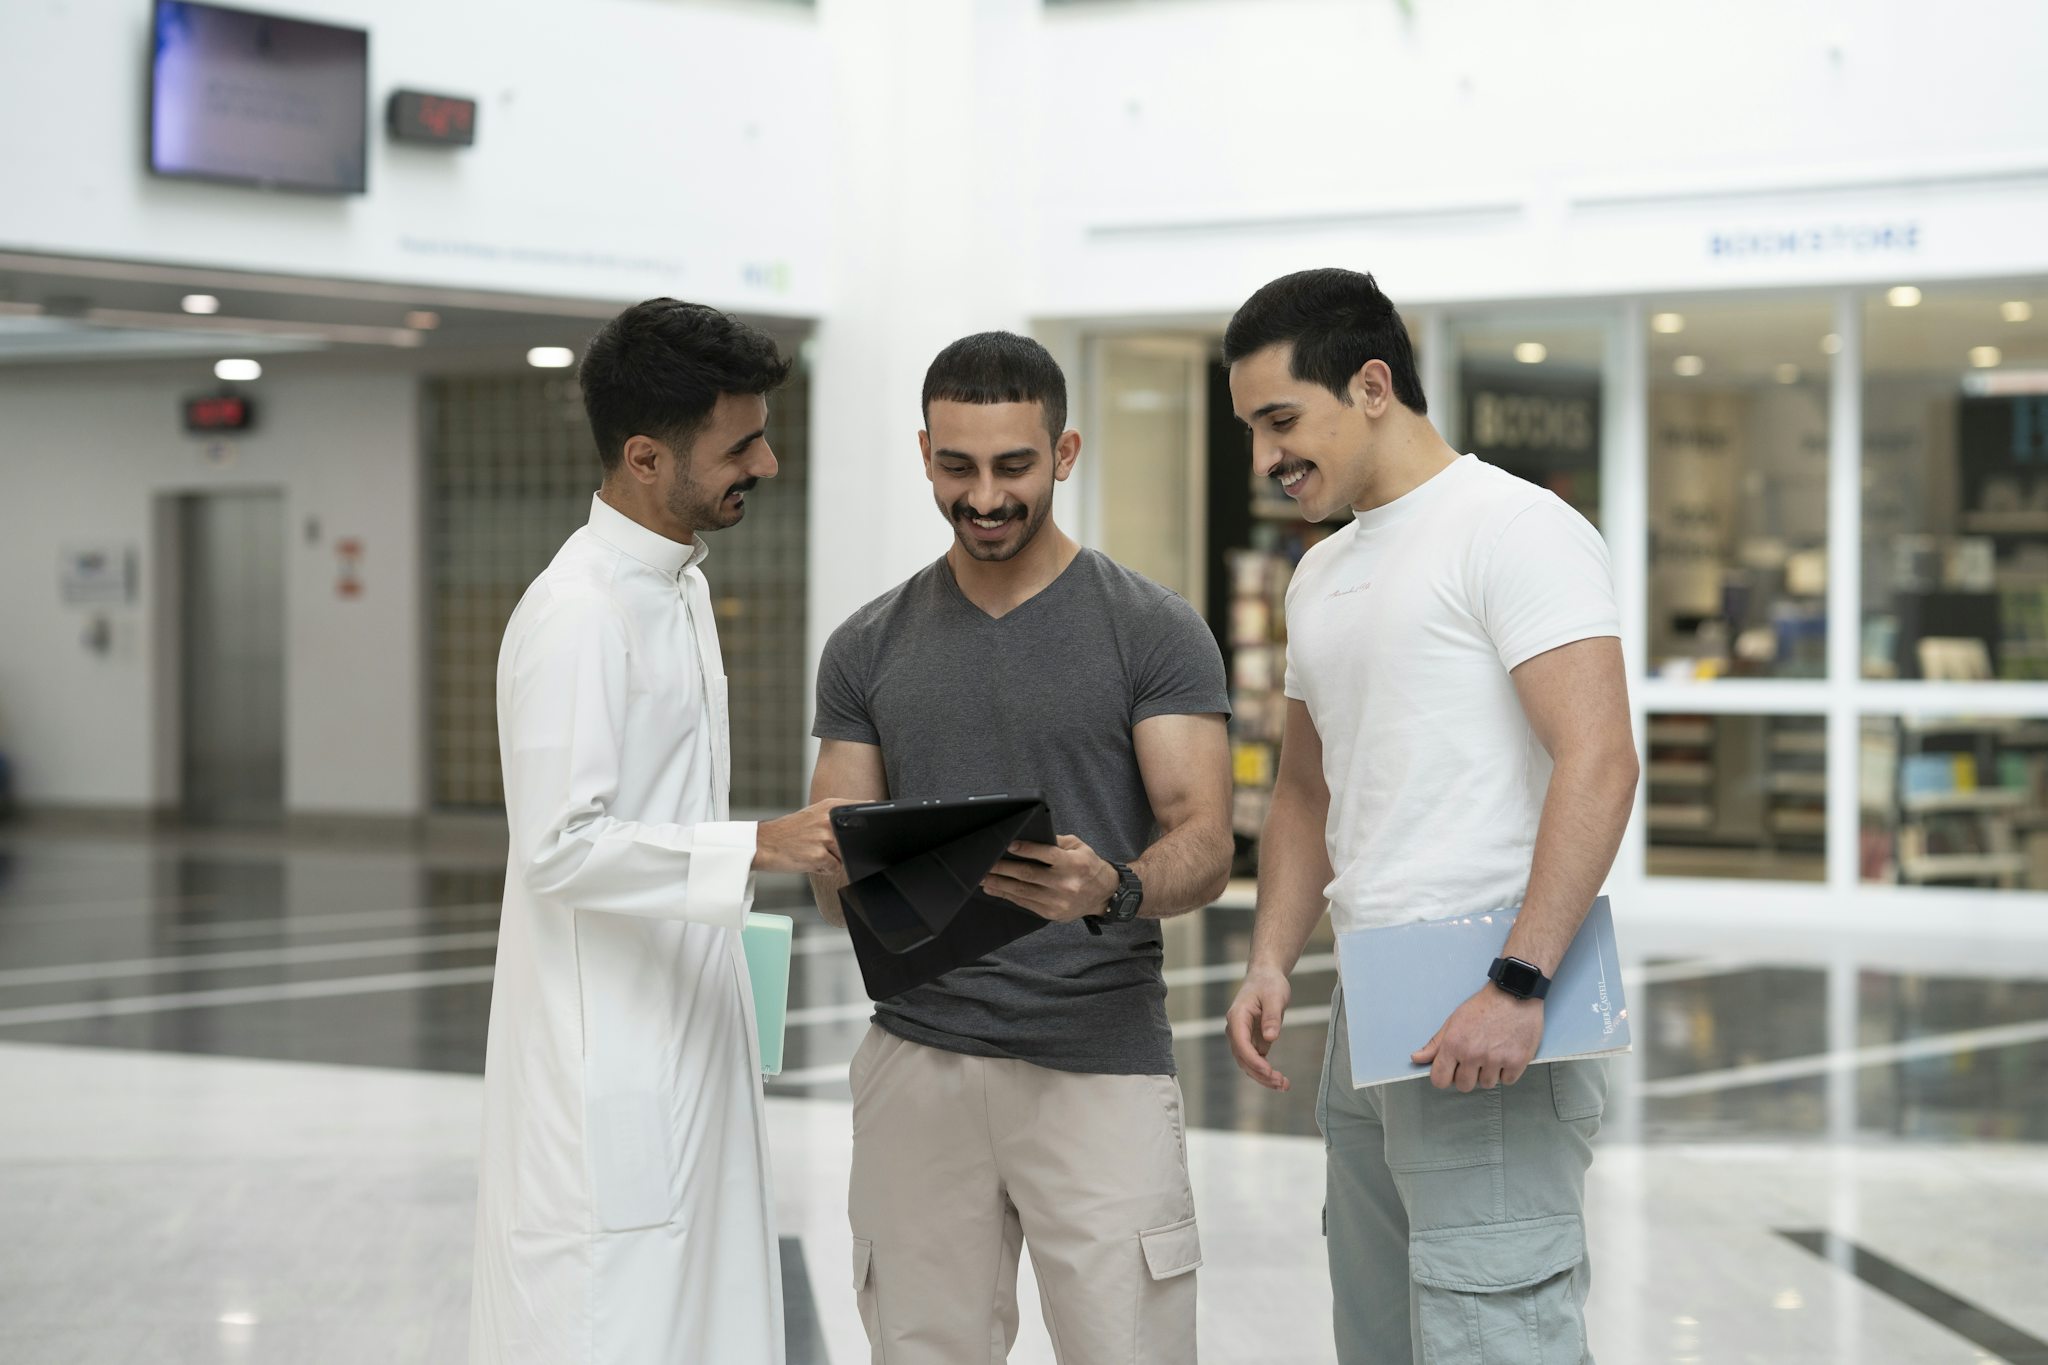 Explore Programs Available at GUST